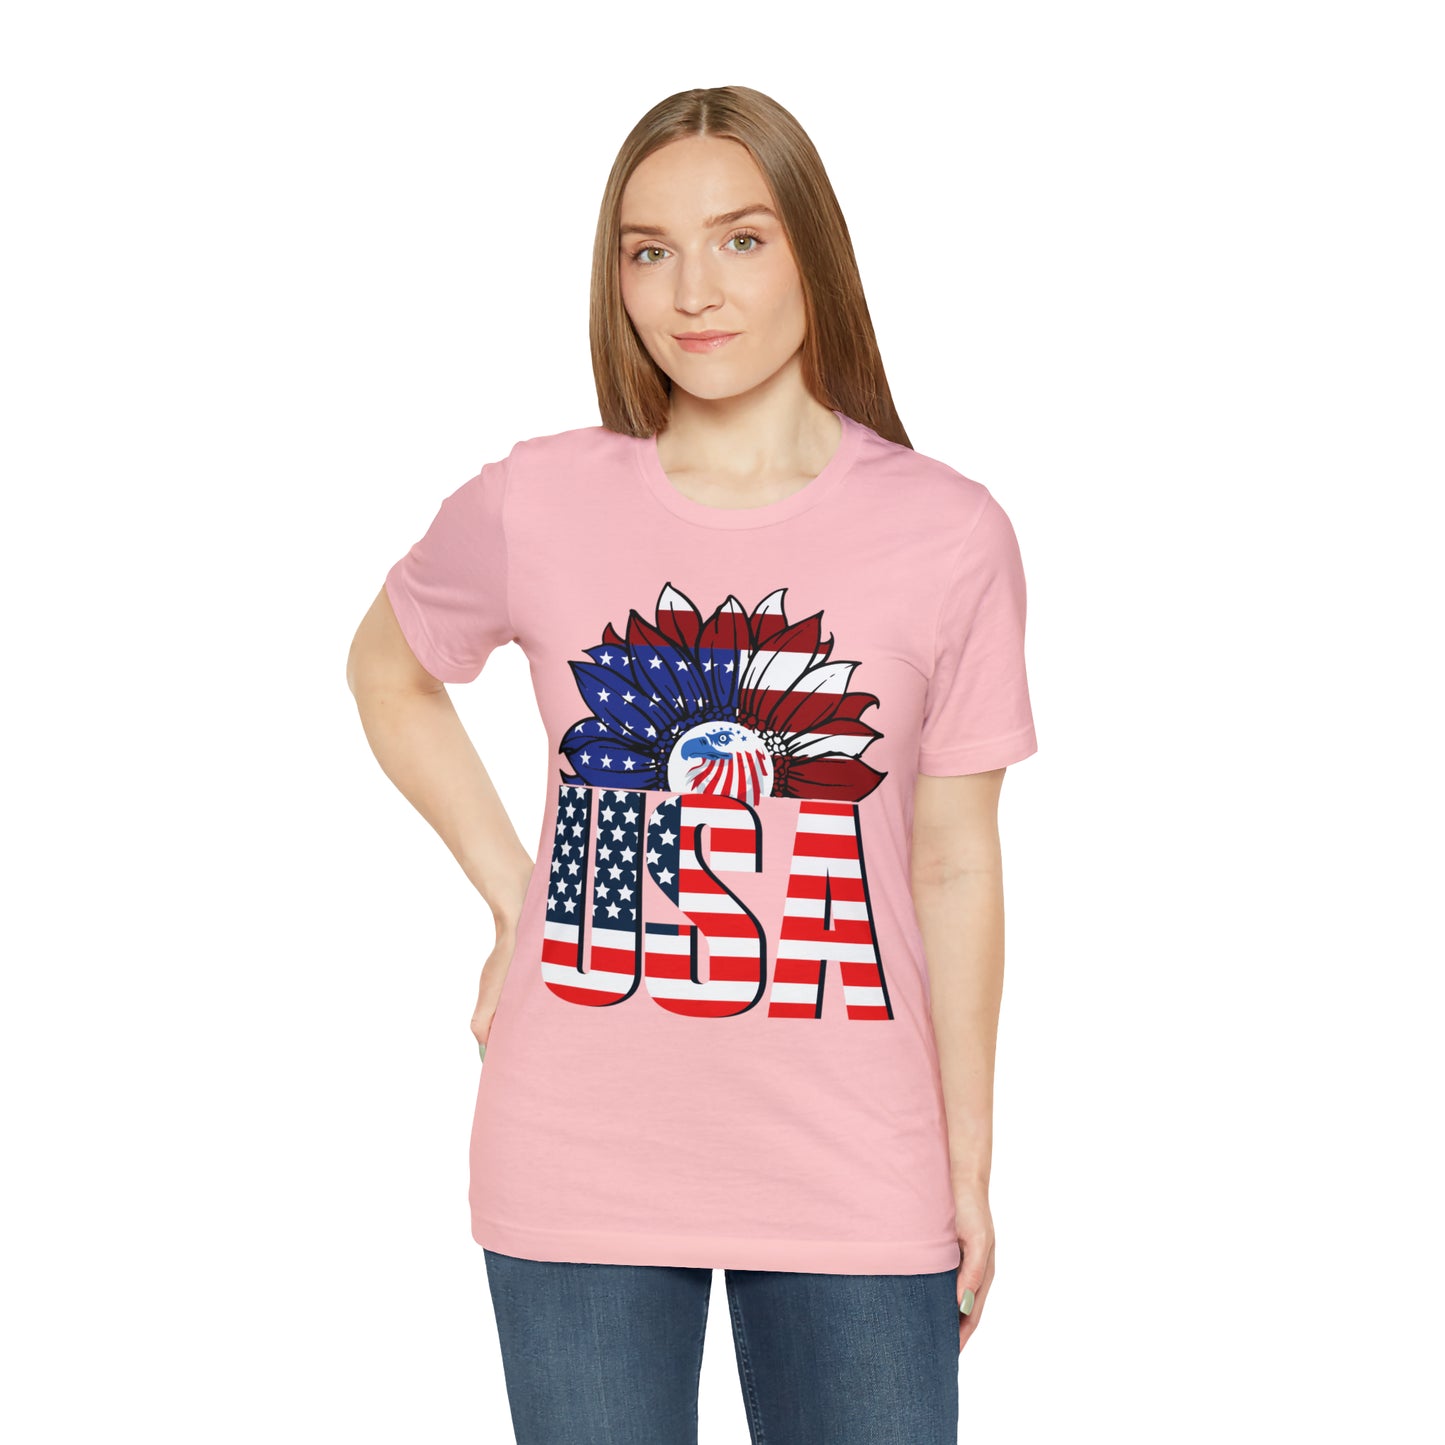 Independence Day shirt, American flag shirt, Red, white, and blue shirt,